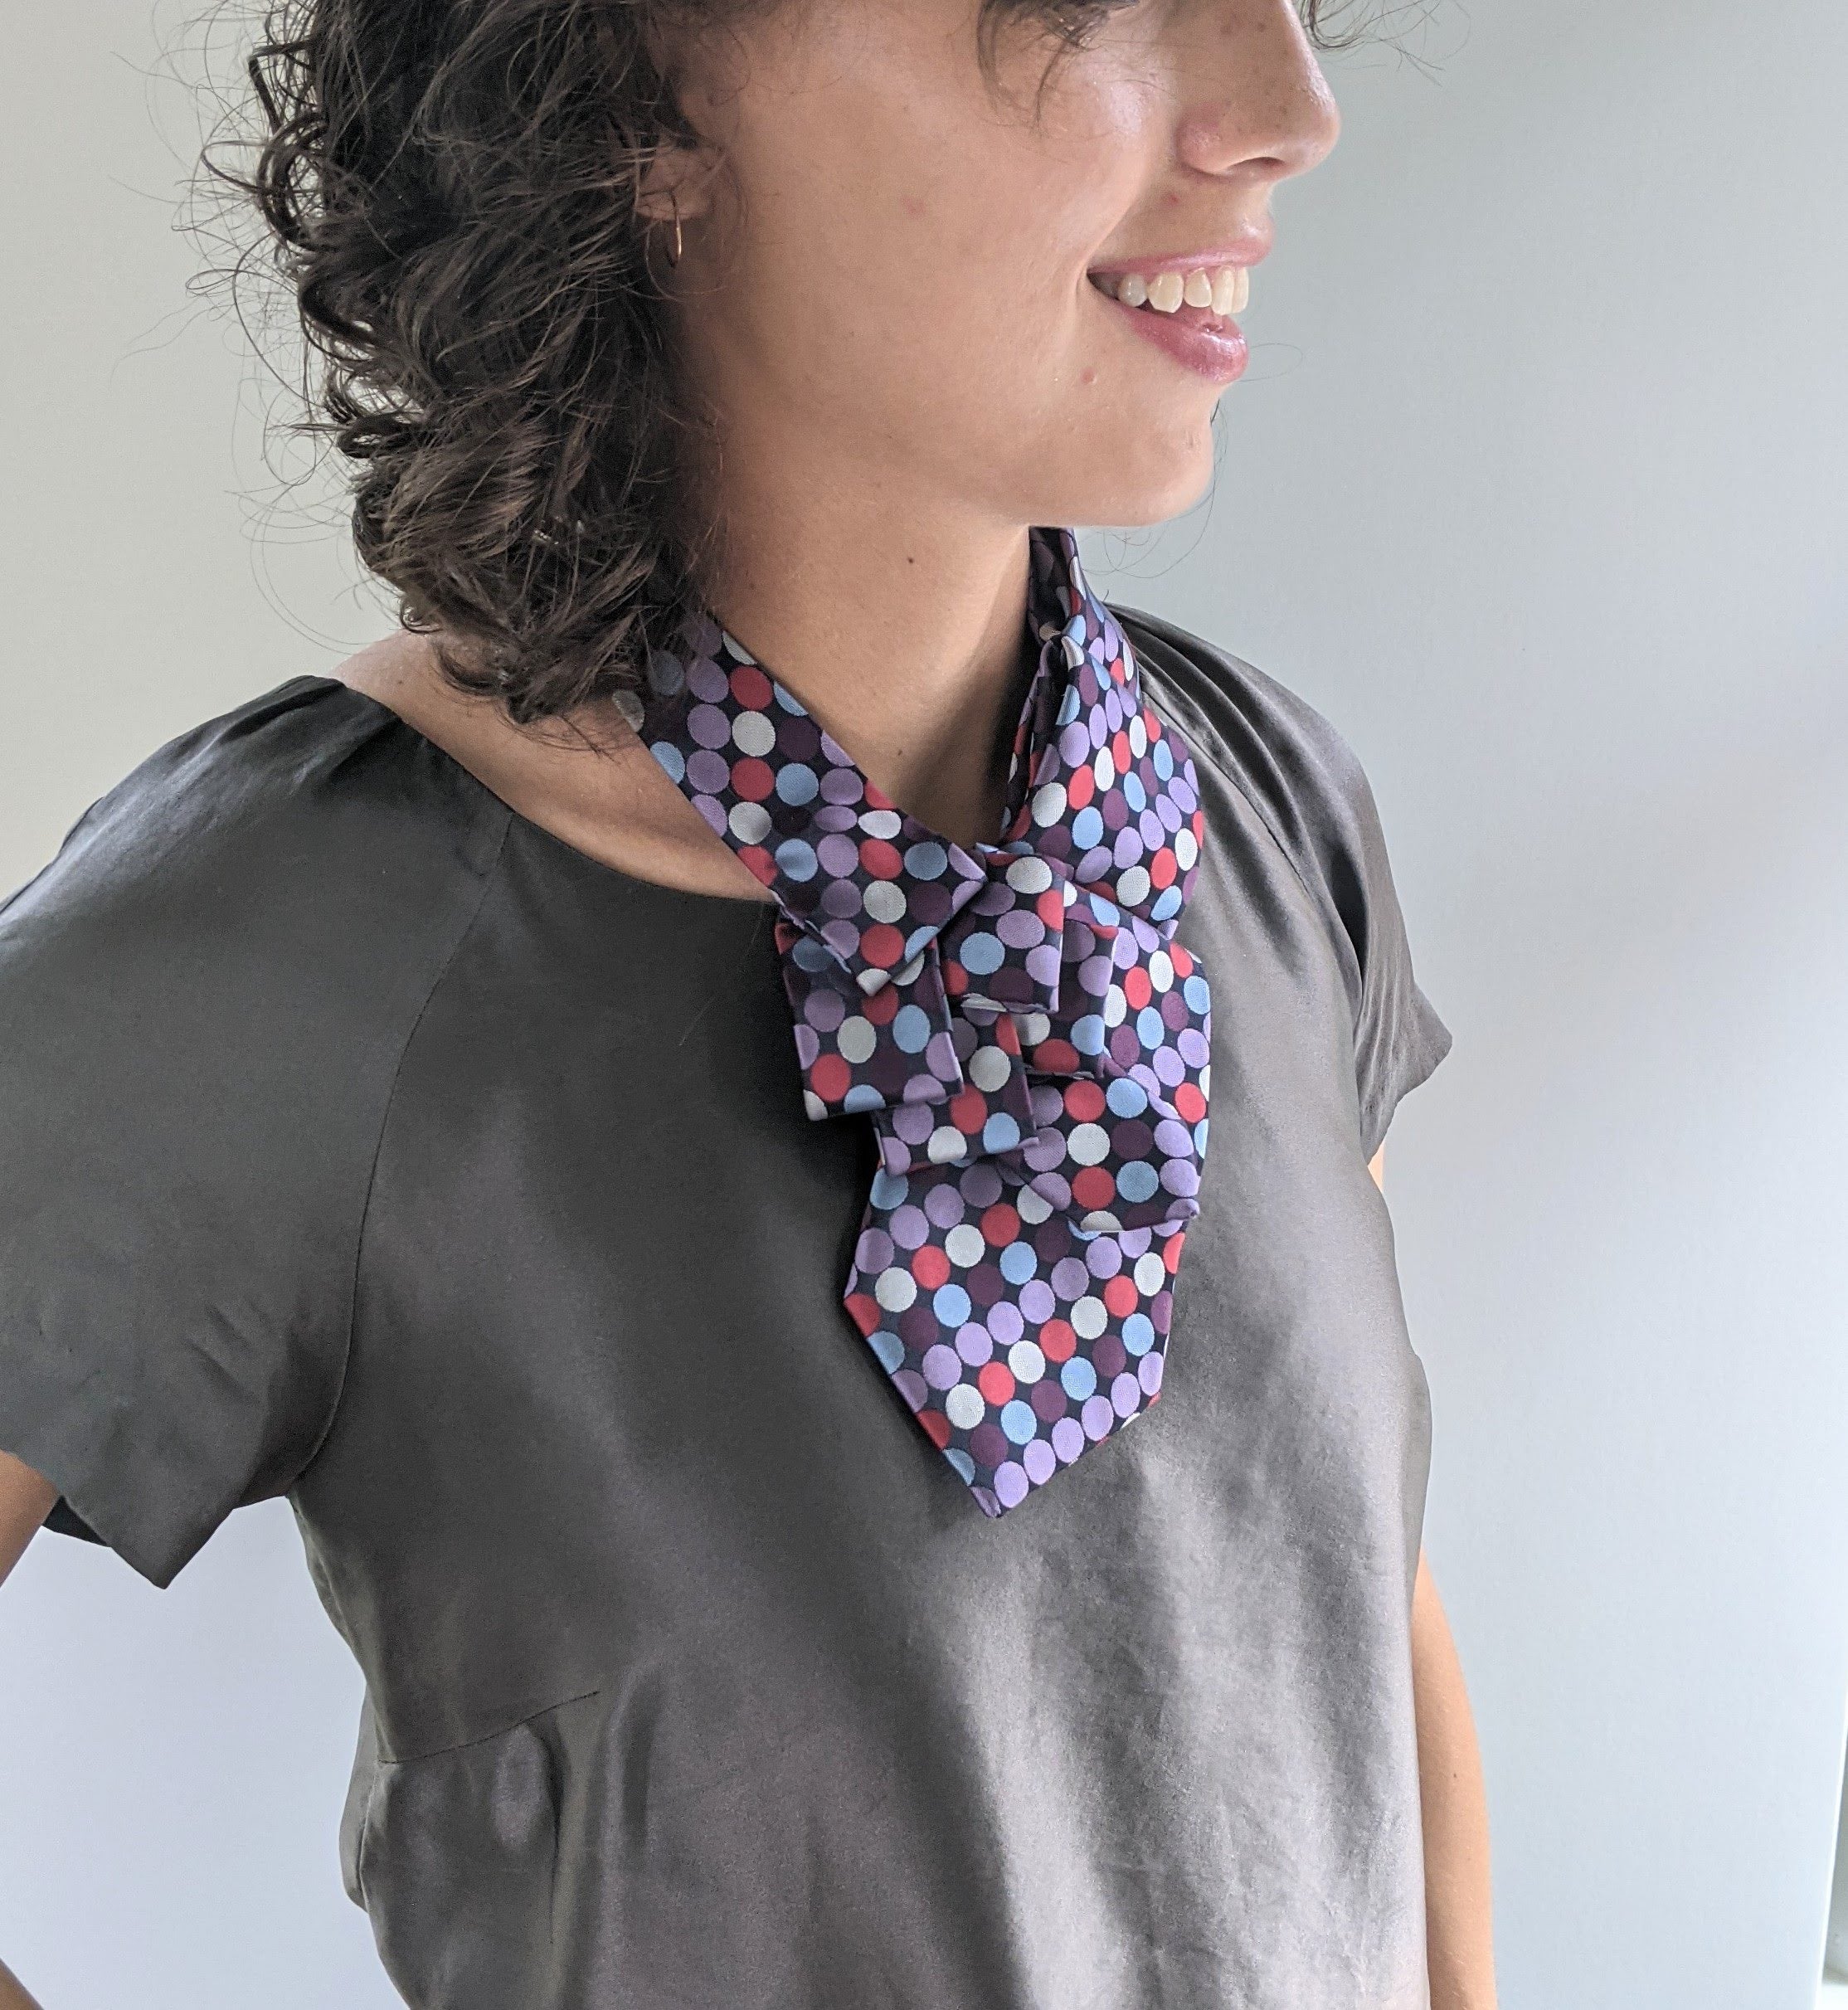 Unique Scarf - Ascot Tie - Necktie Scarf - Office Wear - Gift For Wife -  Black and Grey Lauren Scarf. 30